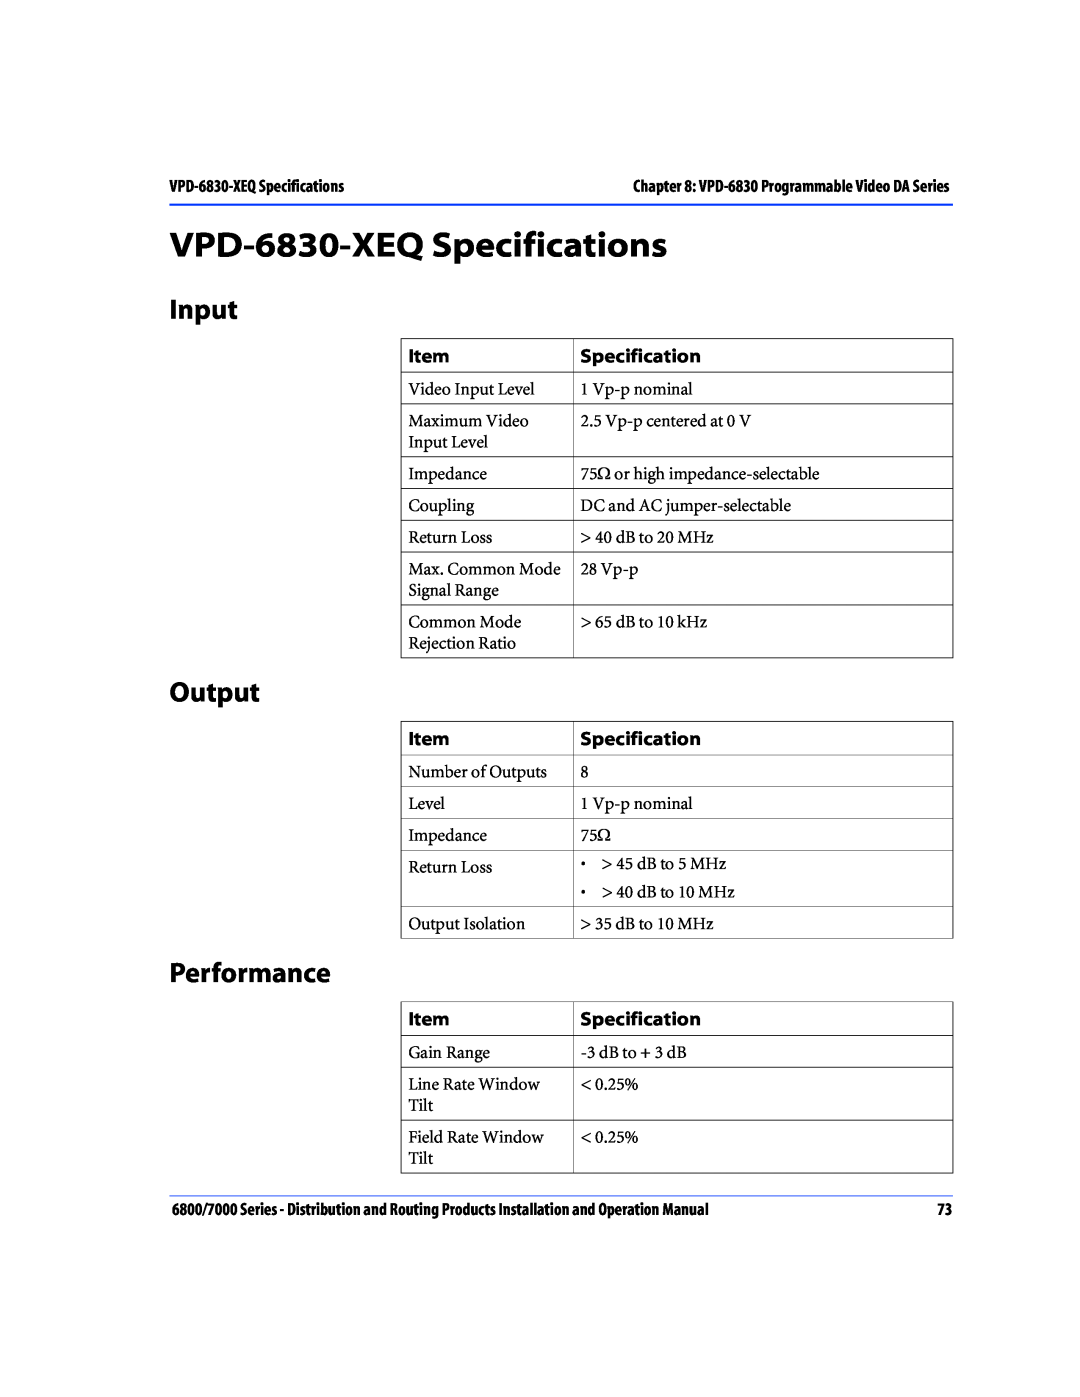 Nokia 6800 Series, 7000 Series operation manual VPD-6830-XEQ Specifications, Input, Output, Performance 